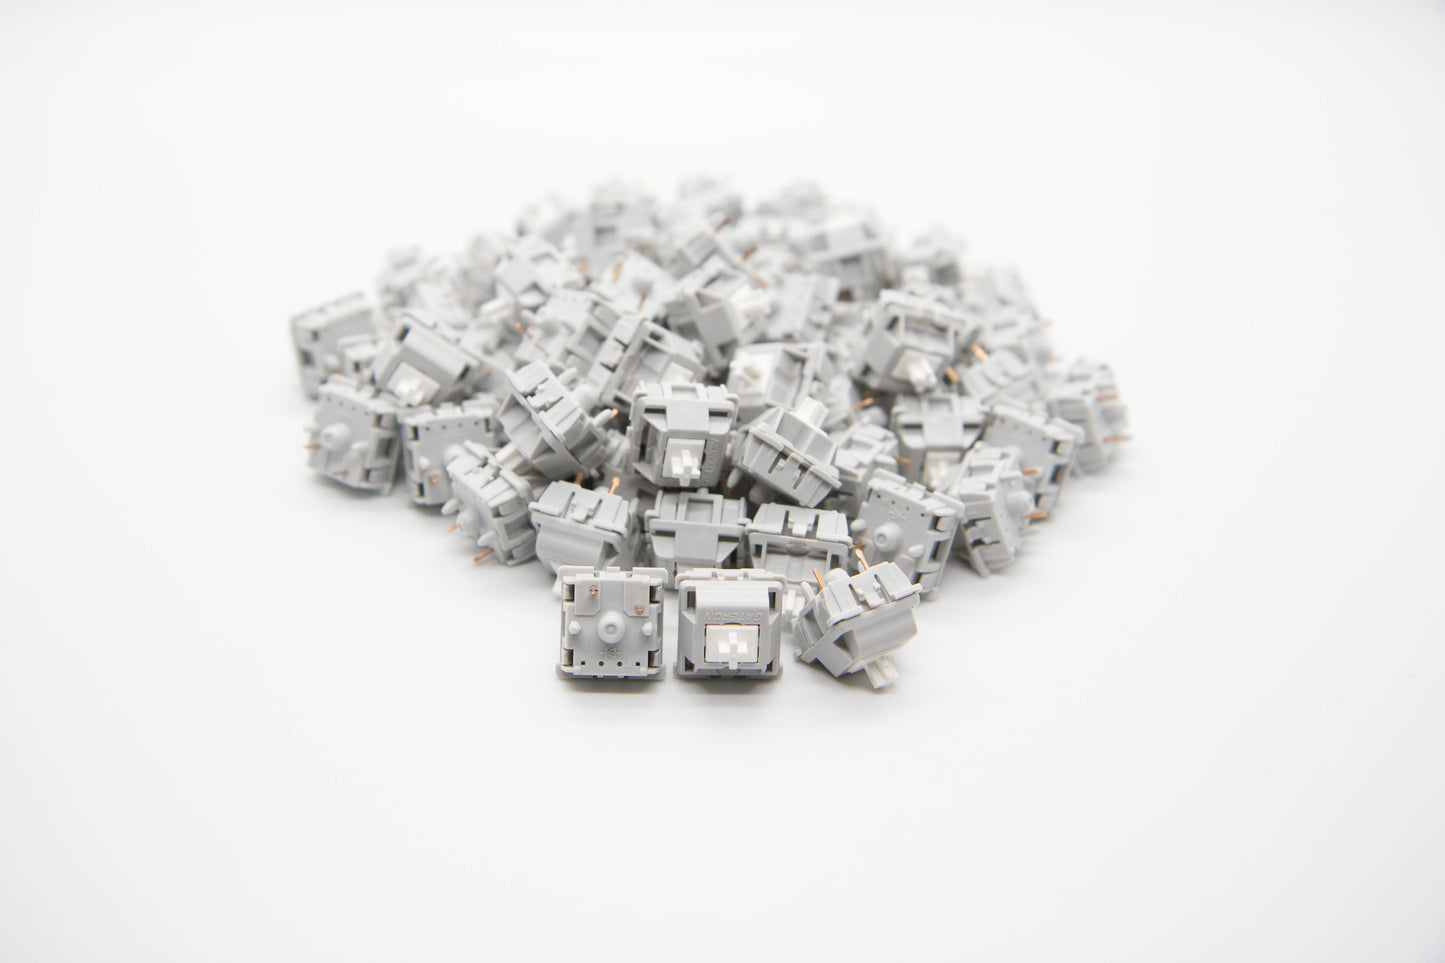 Close-up shot of a pile of Gateron Silver Blizzard mechanical keyboard switches featuring light gray housing and white stems